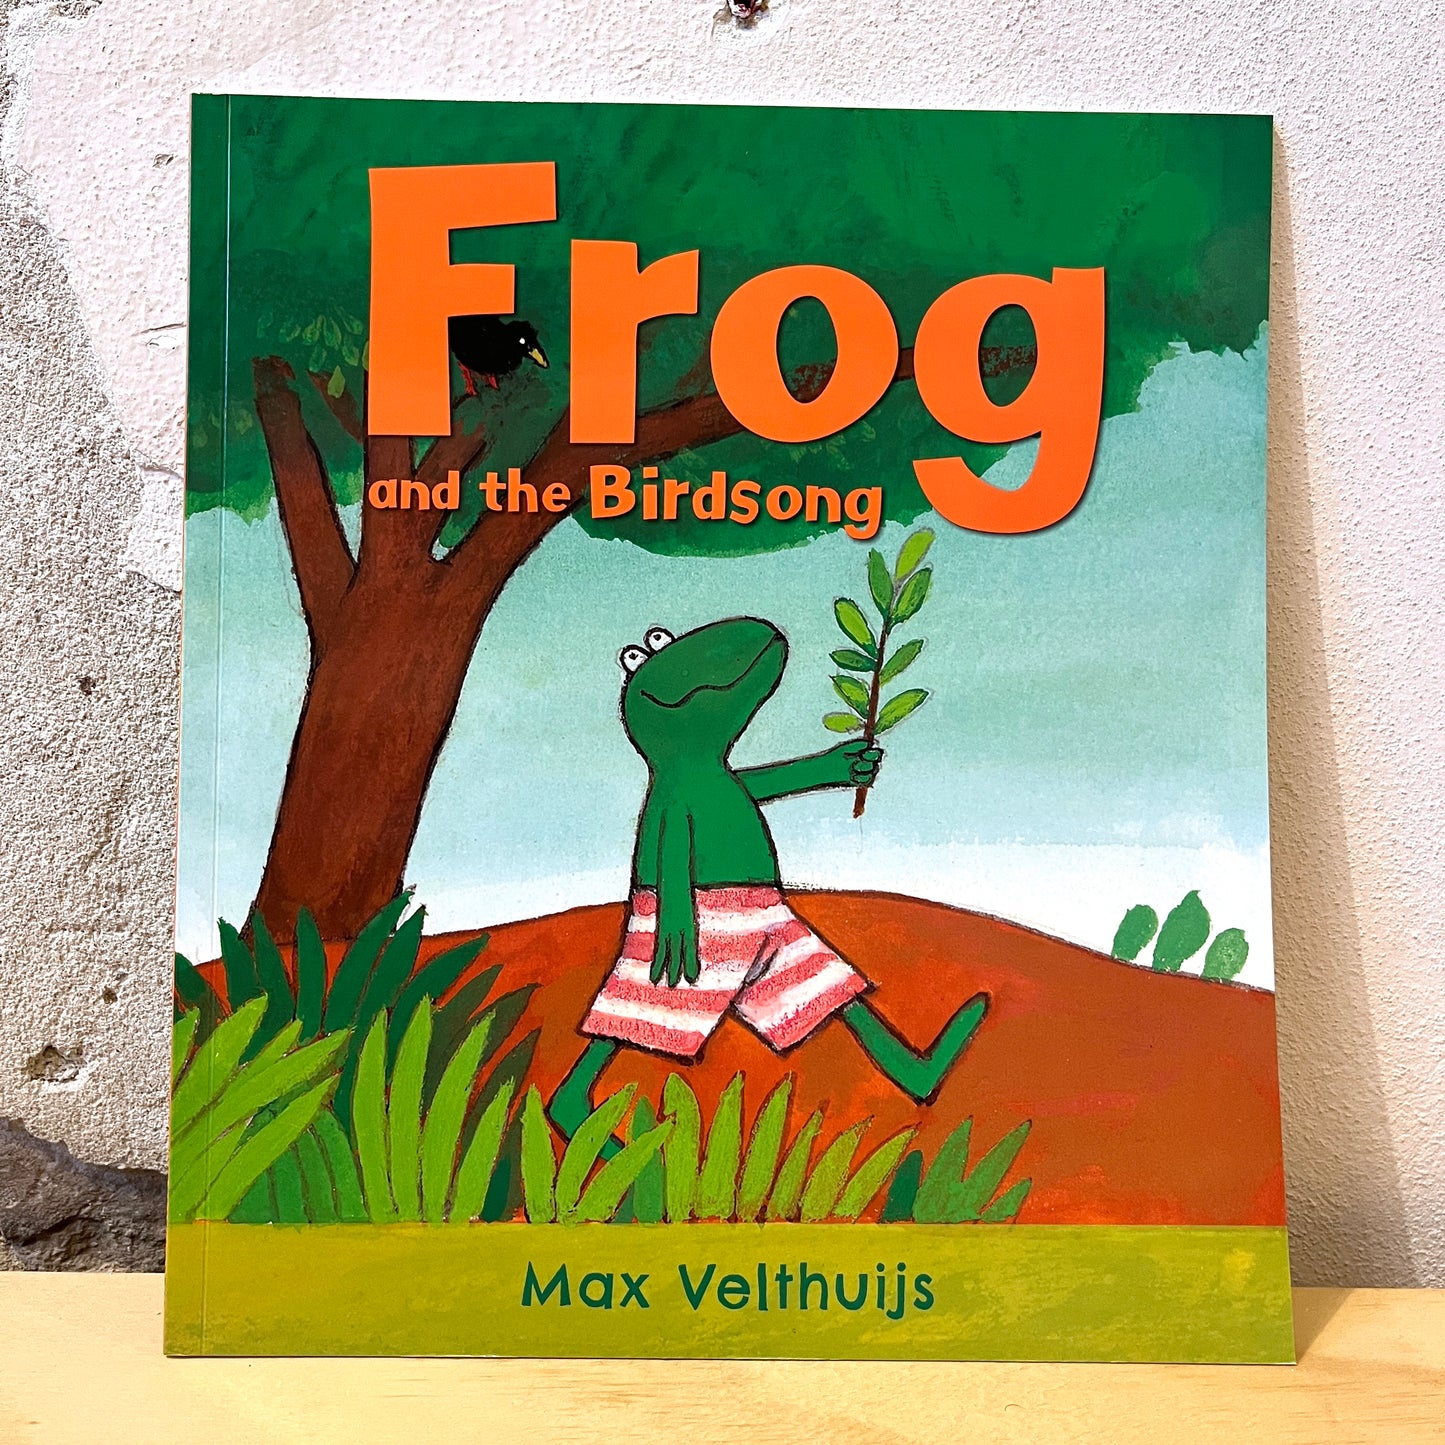 Frog and the Birdsong – Max Velthuijs